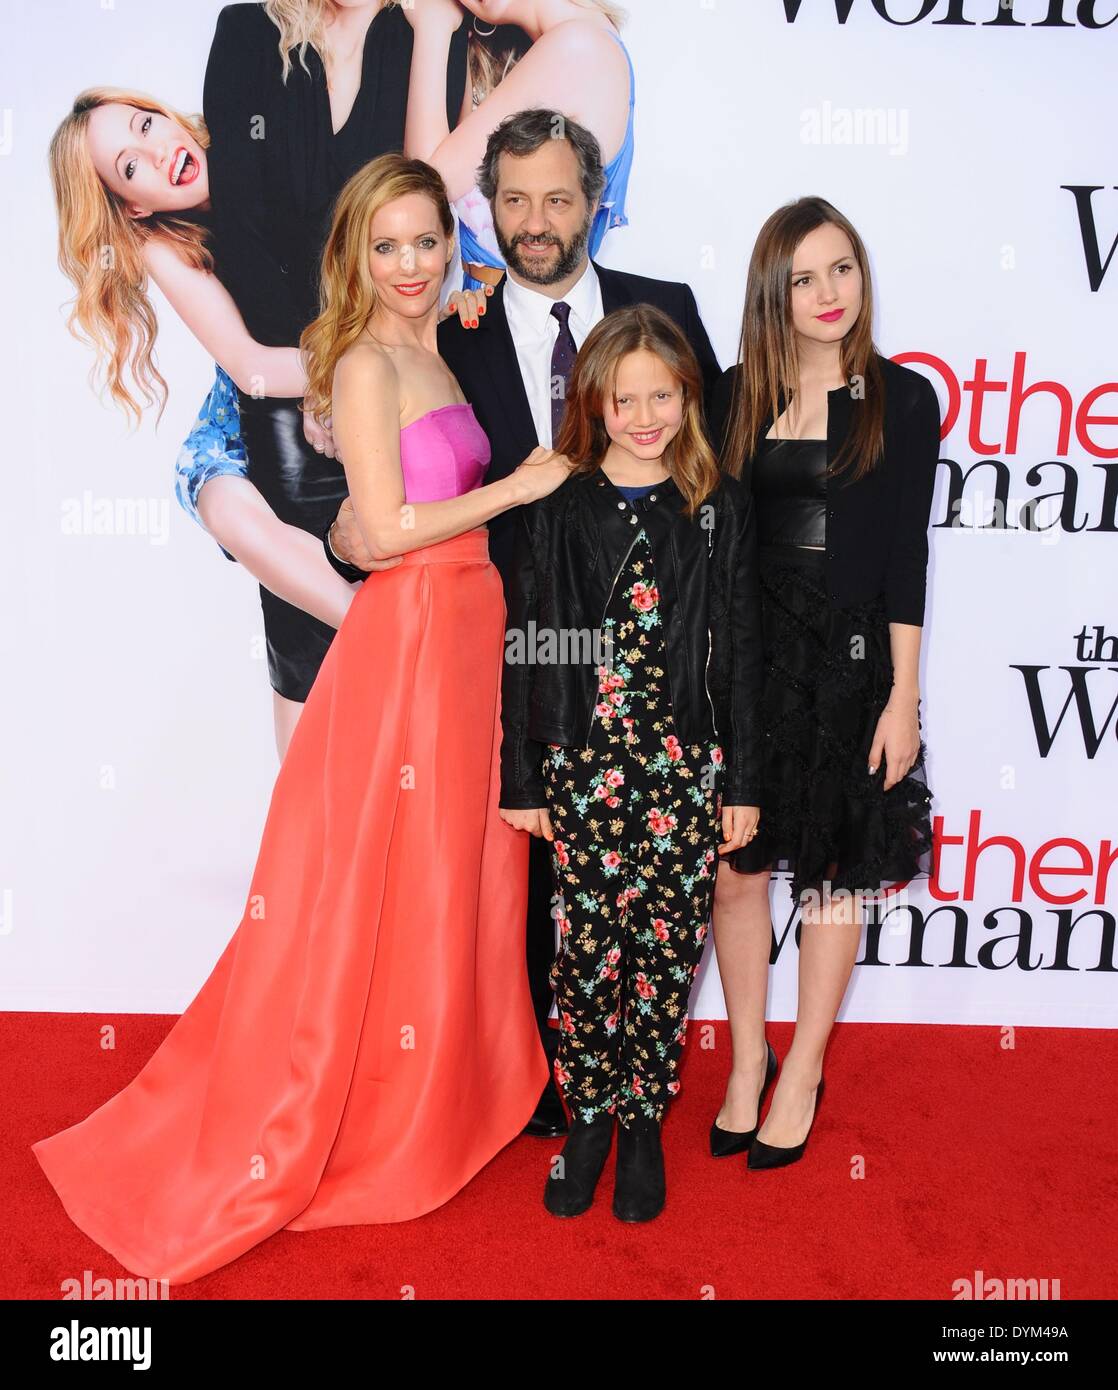 Los Angeles, California. 3rd Apr, 2018. Judd Apatow and his daughters Iris  Apatow and Maude Apatow attending the 'Blockers' premiere at Regency  Village Theater on April 3, 2018 in Los Angeles, California.